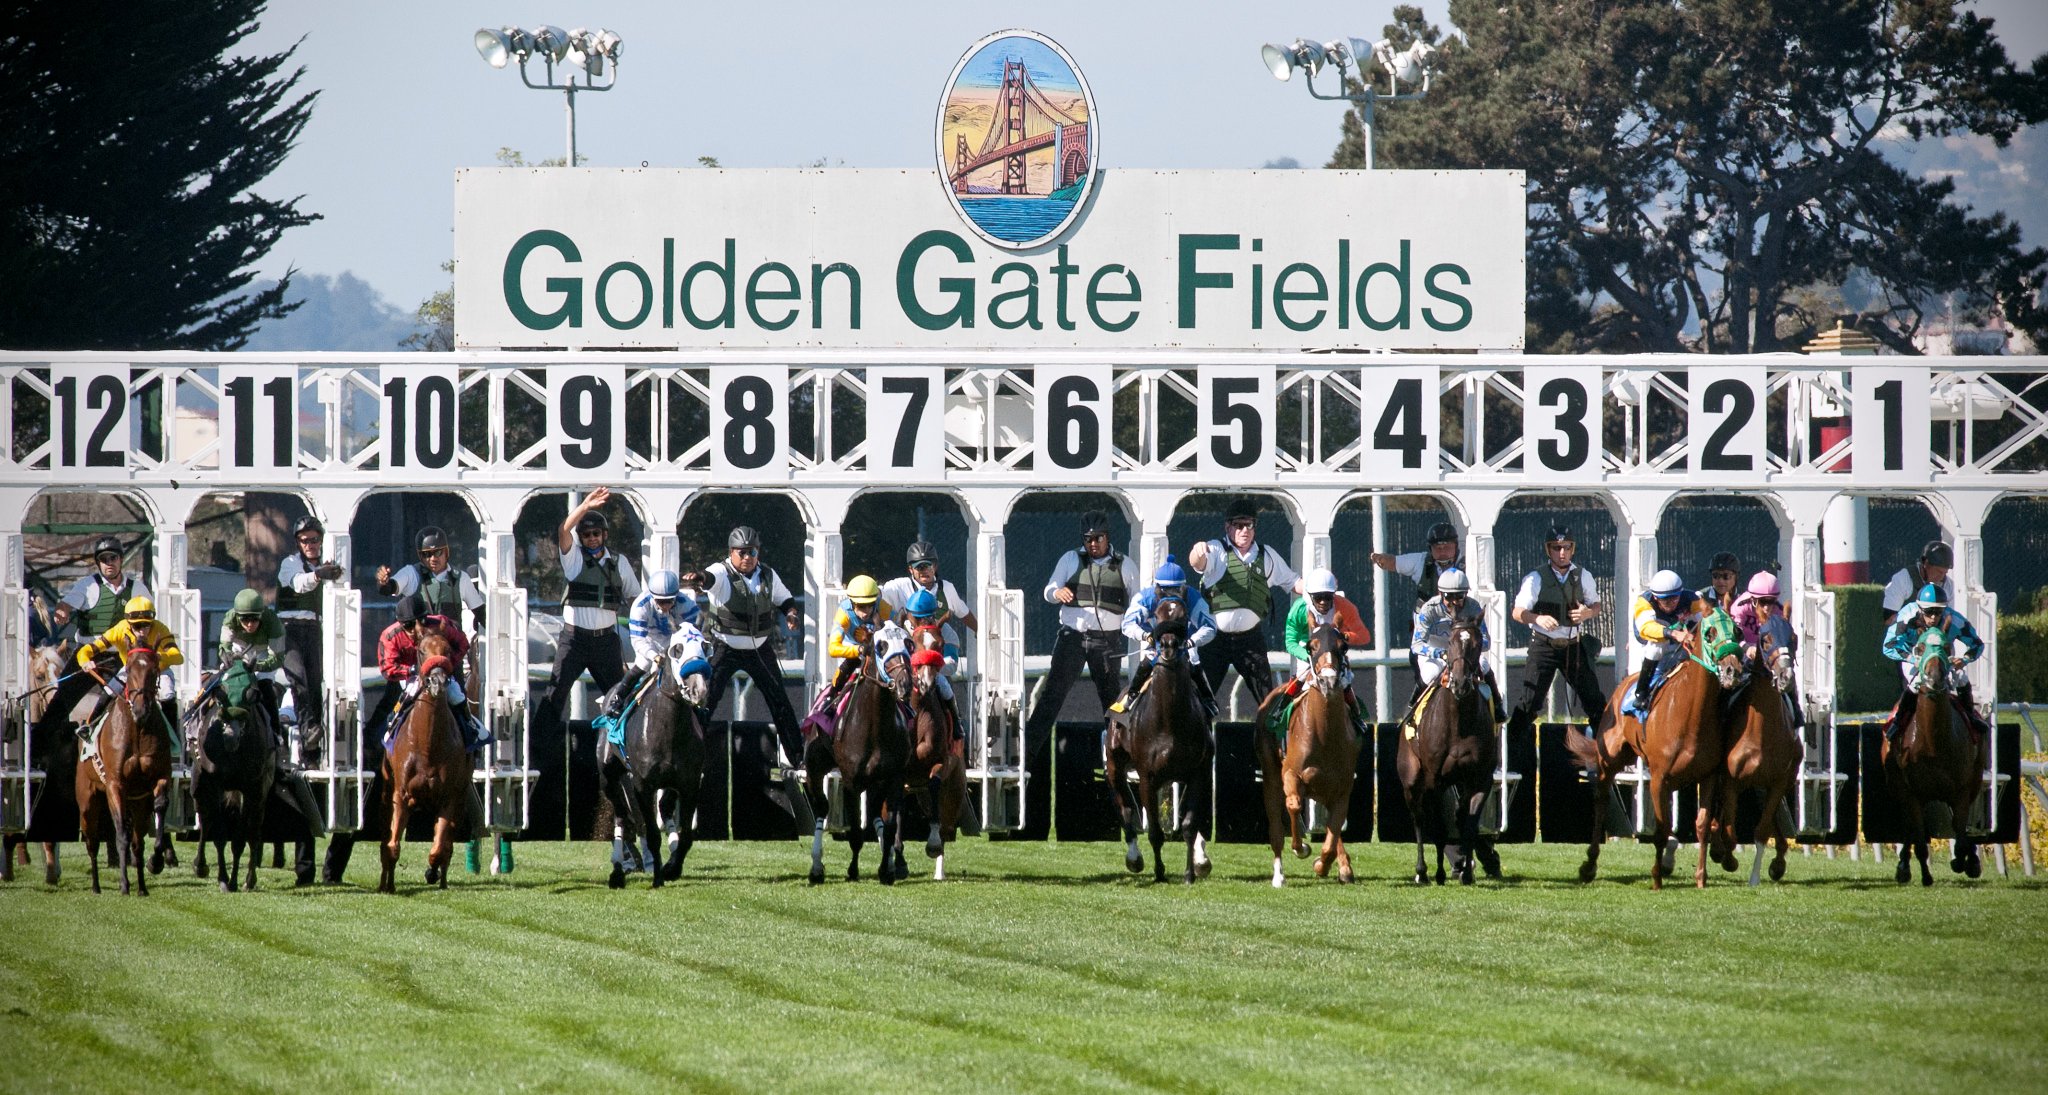 Golden gate race track results